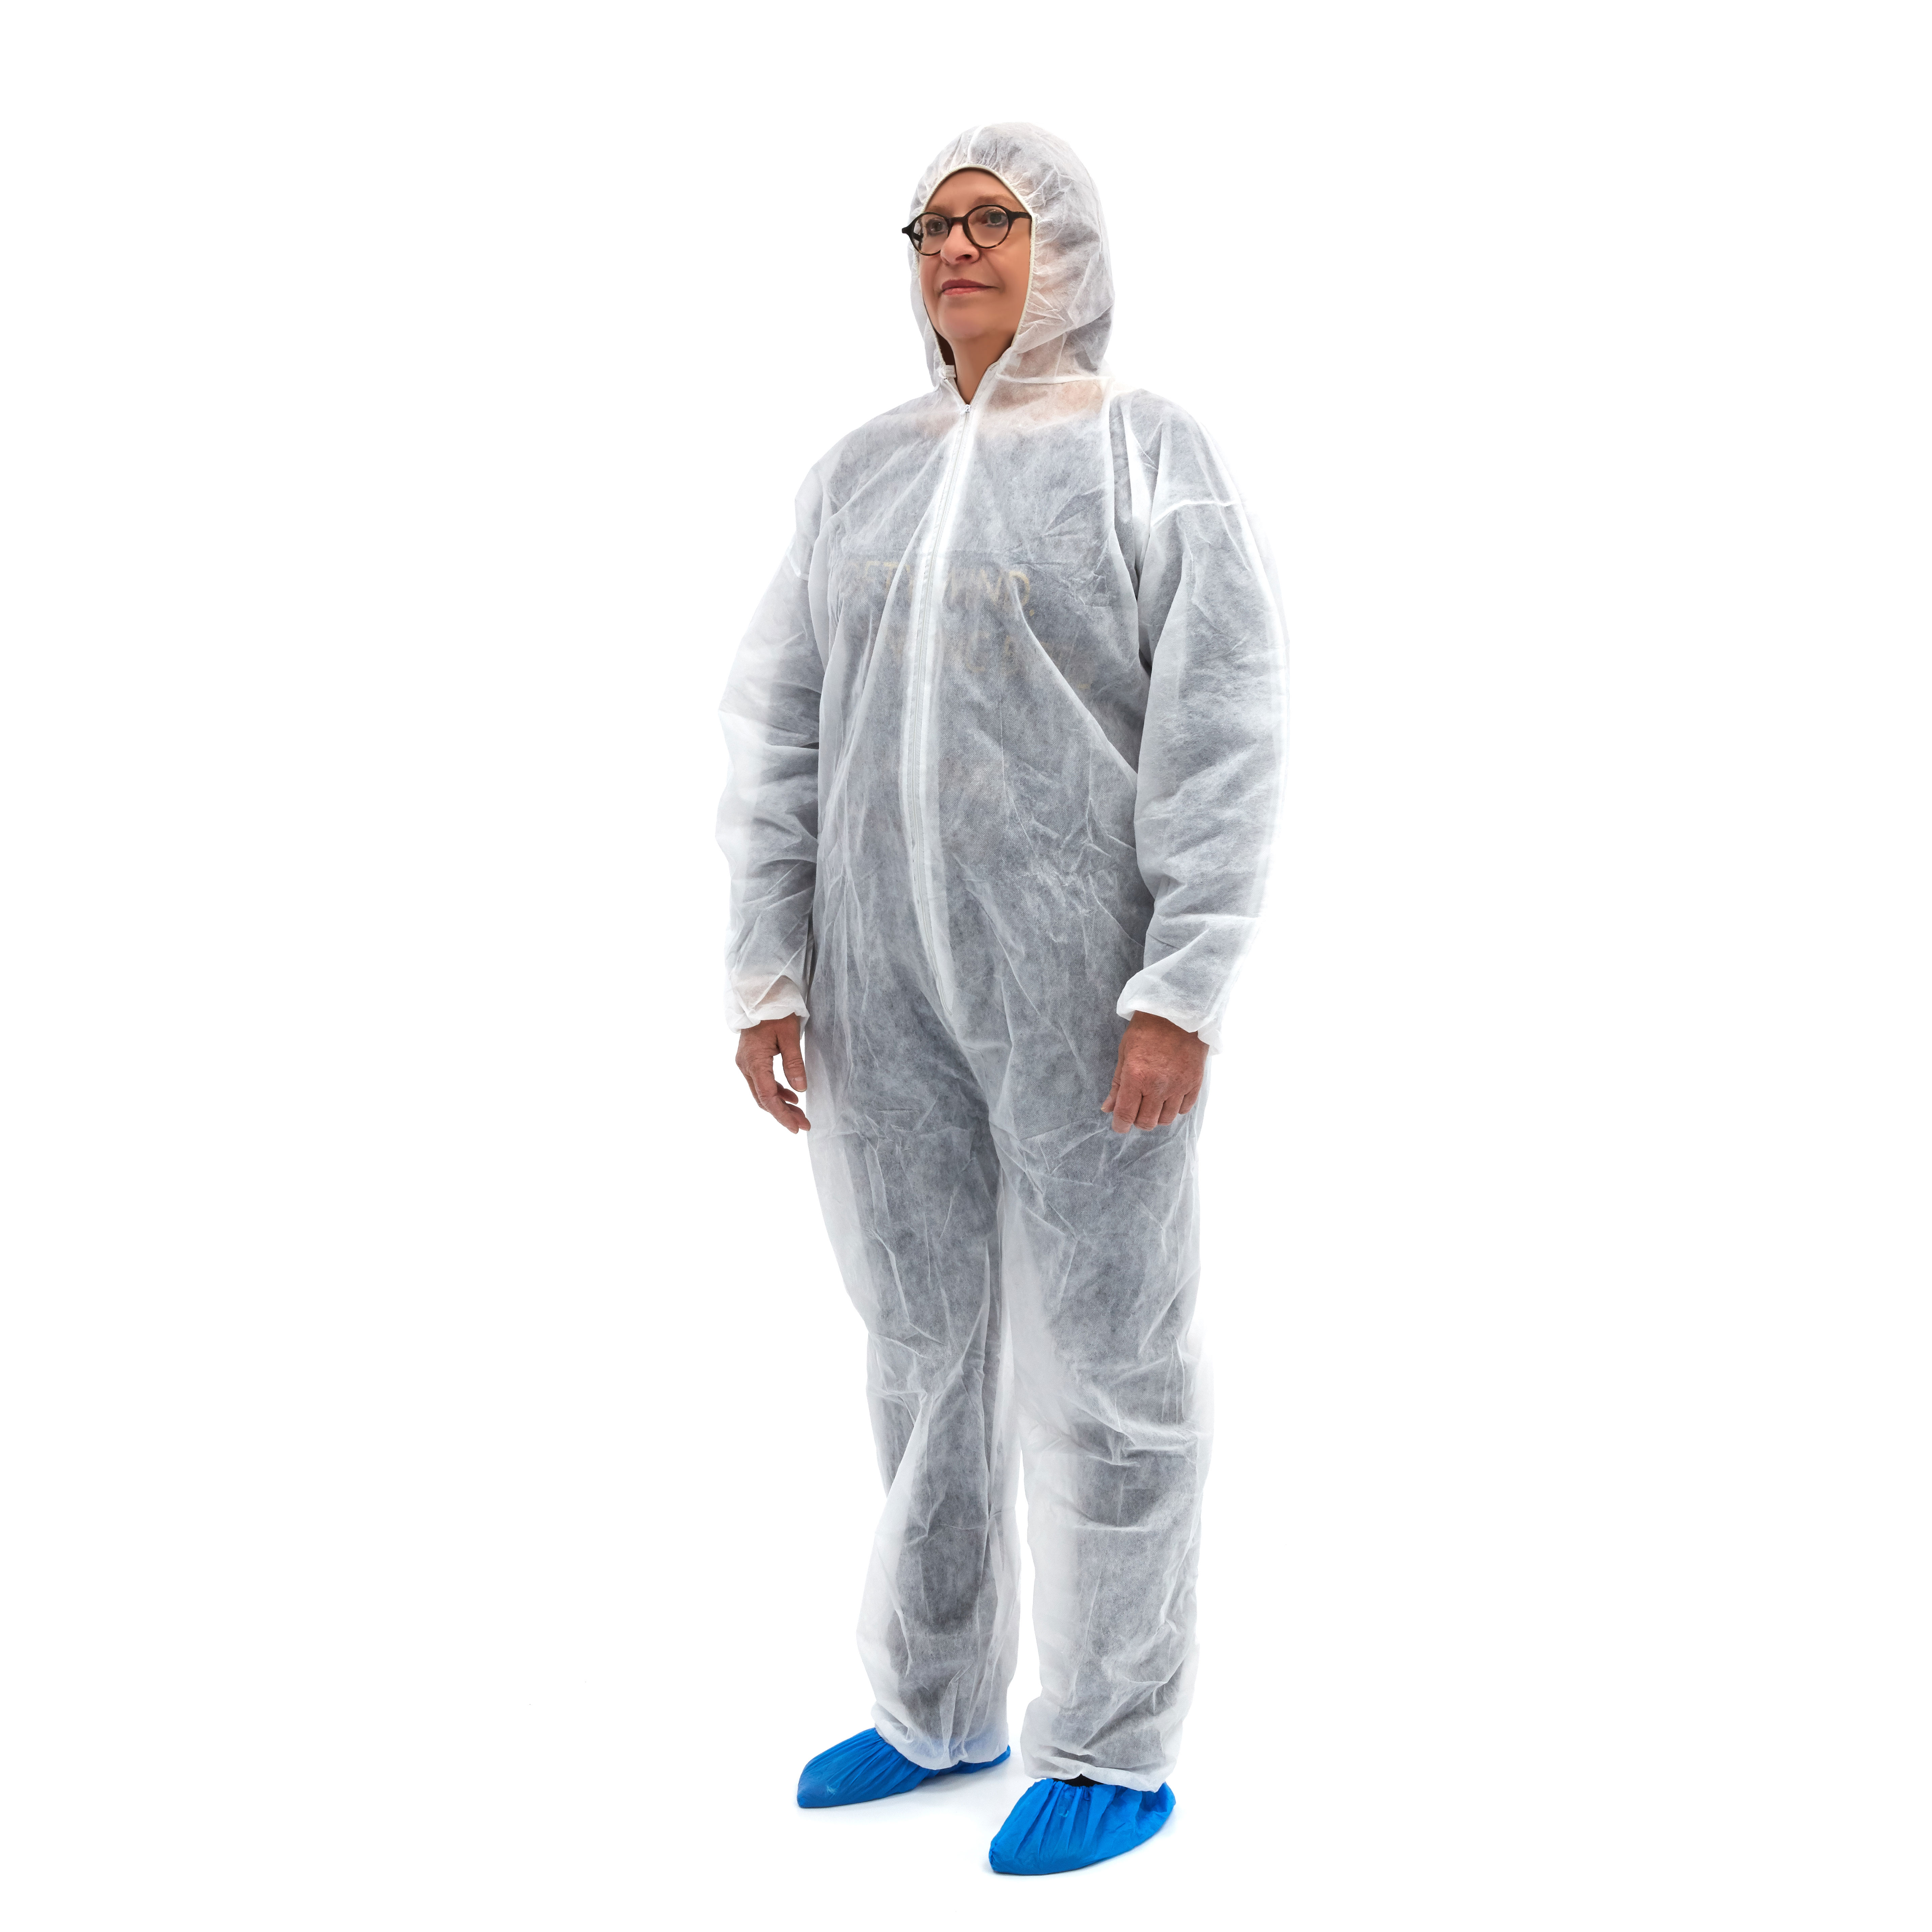 OVE-M Romed overalls, waisted, with capuchin, size medium, white, non sterile, non-woven, per piece in a polybag, 50 pcs in a carton.